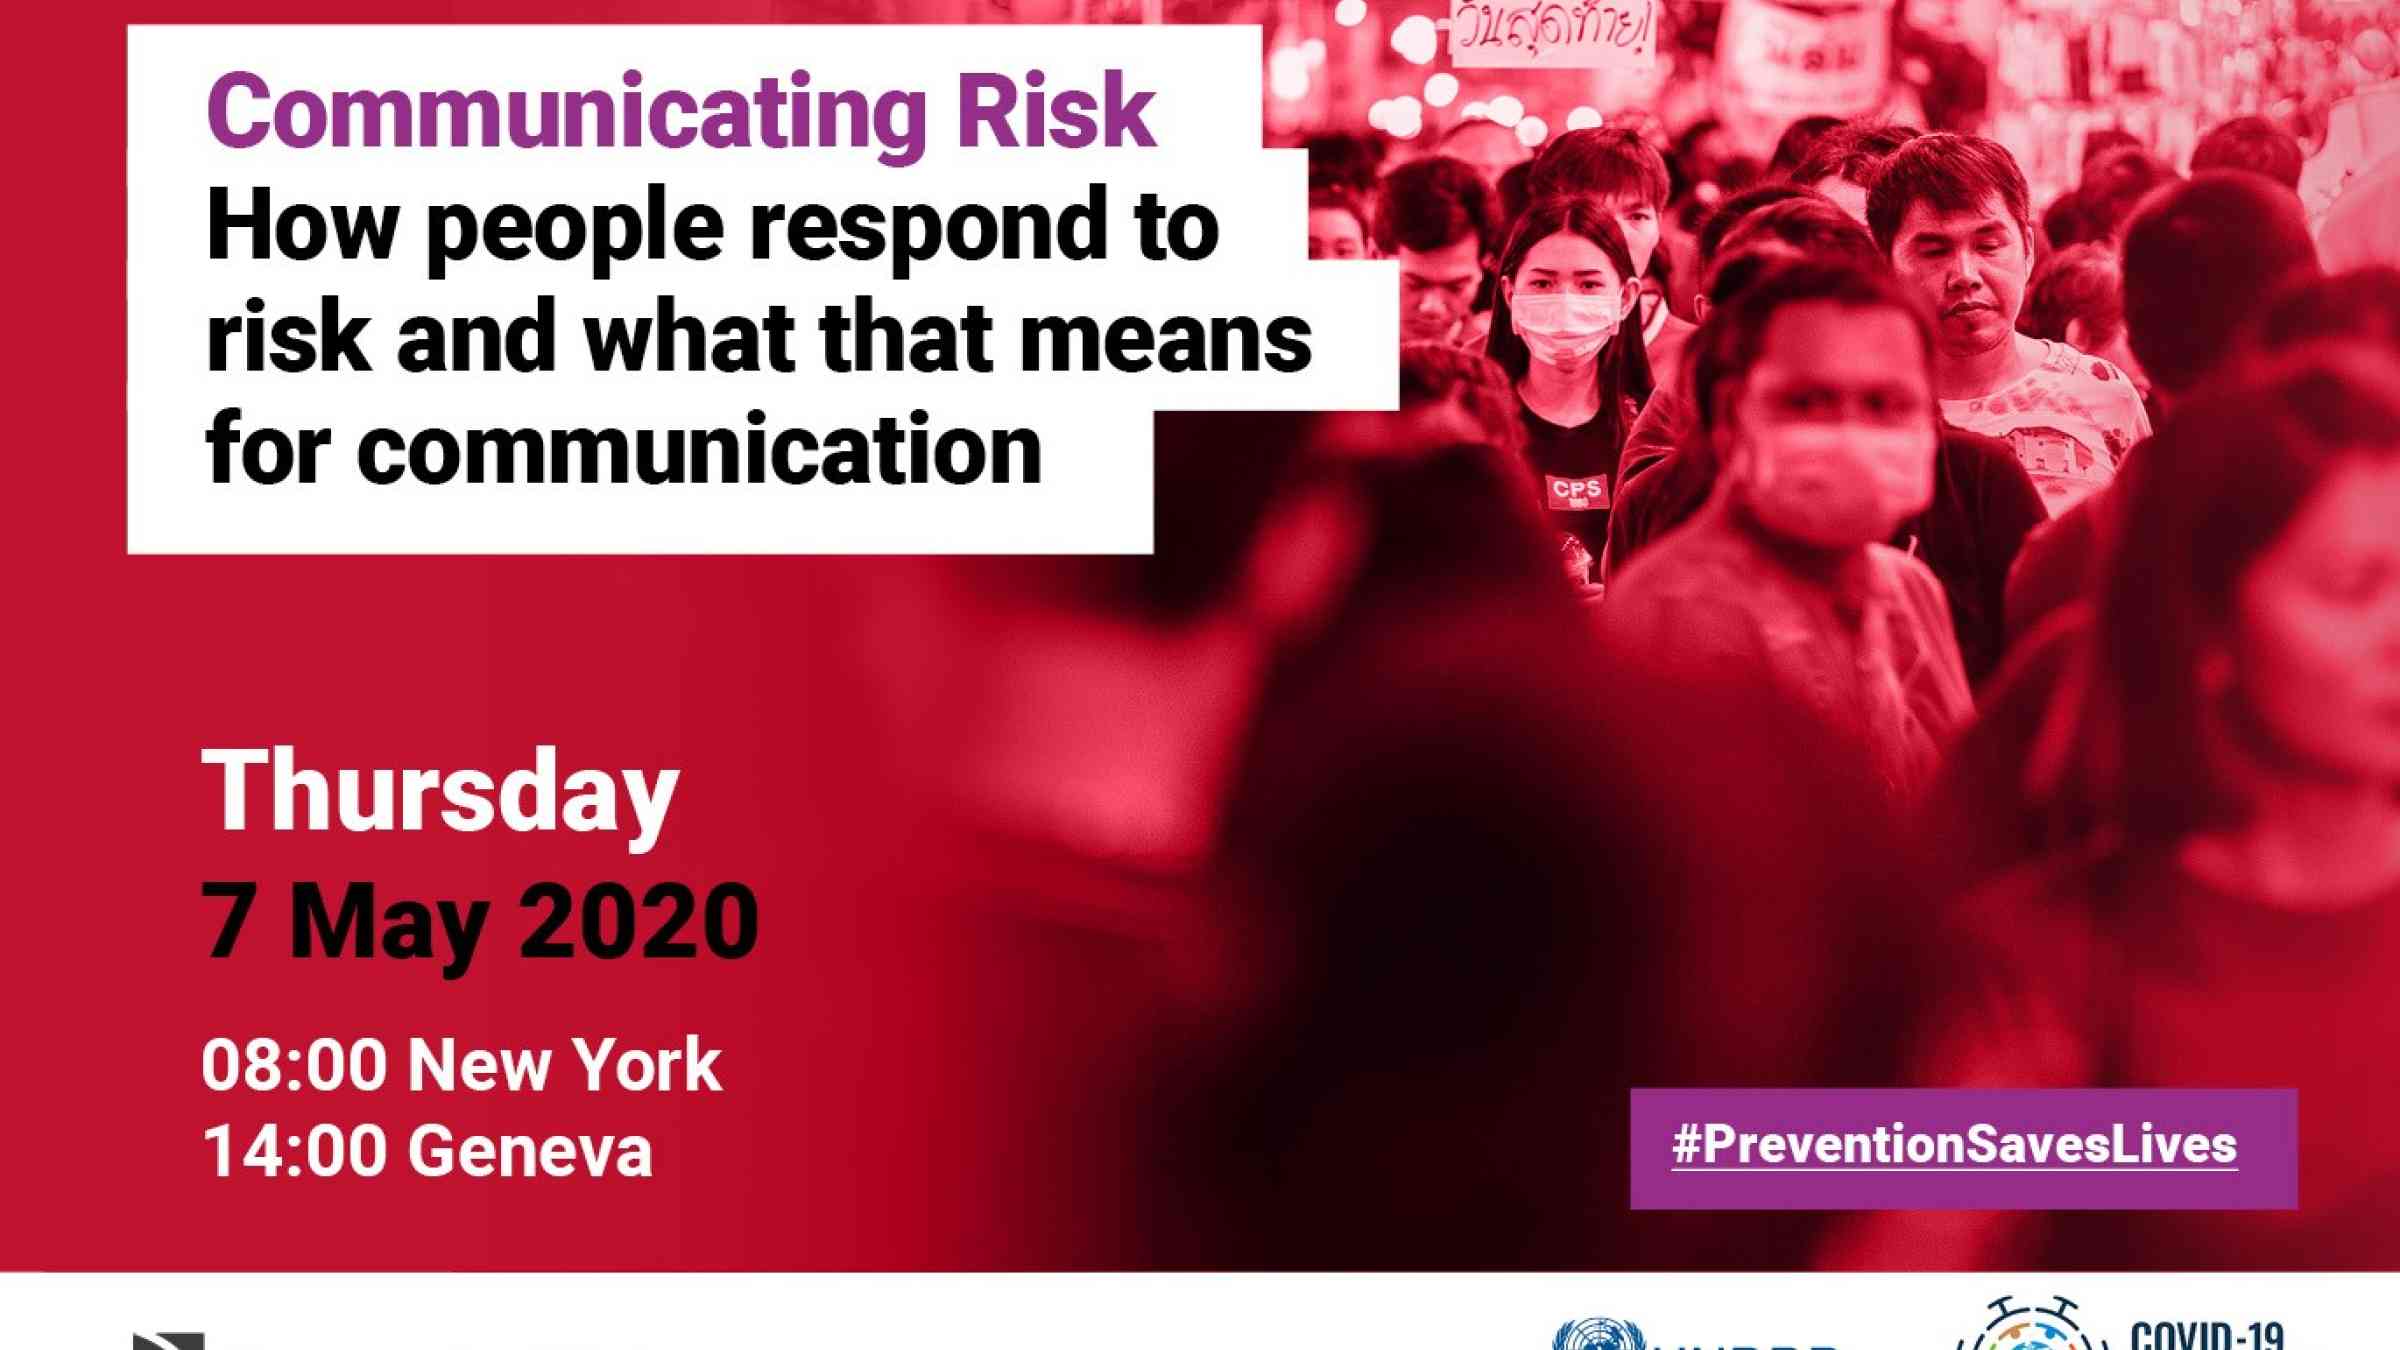 Image of a crowd of people with the text: Communicating Risk: how people respond to risk and what that means for communication